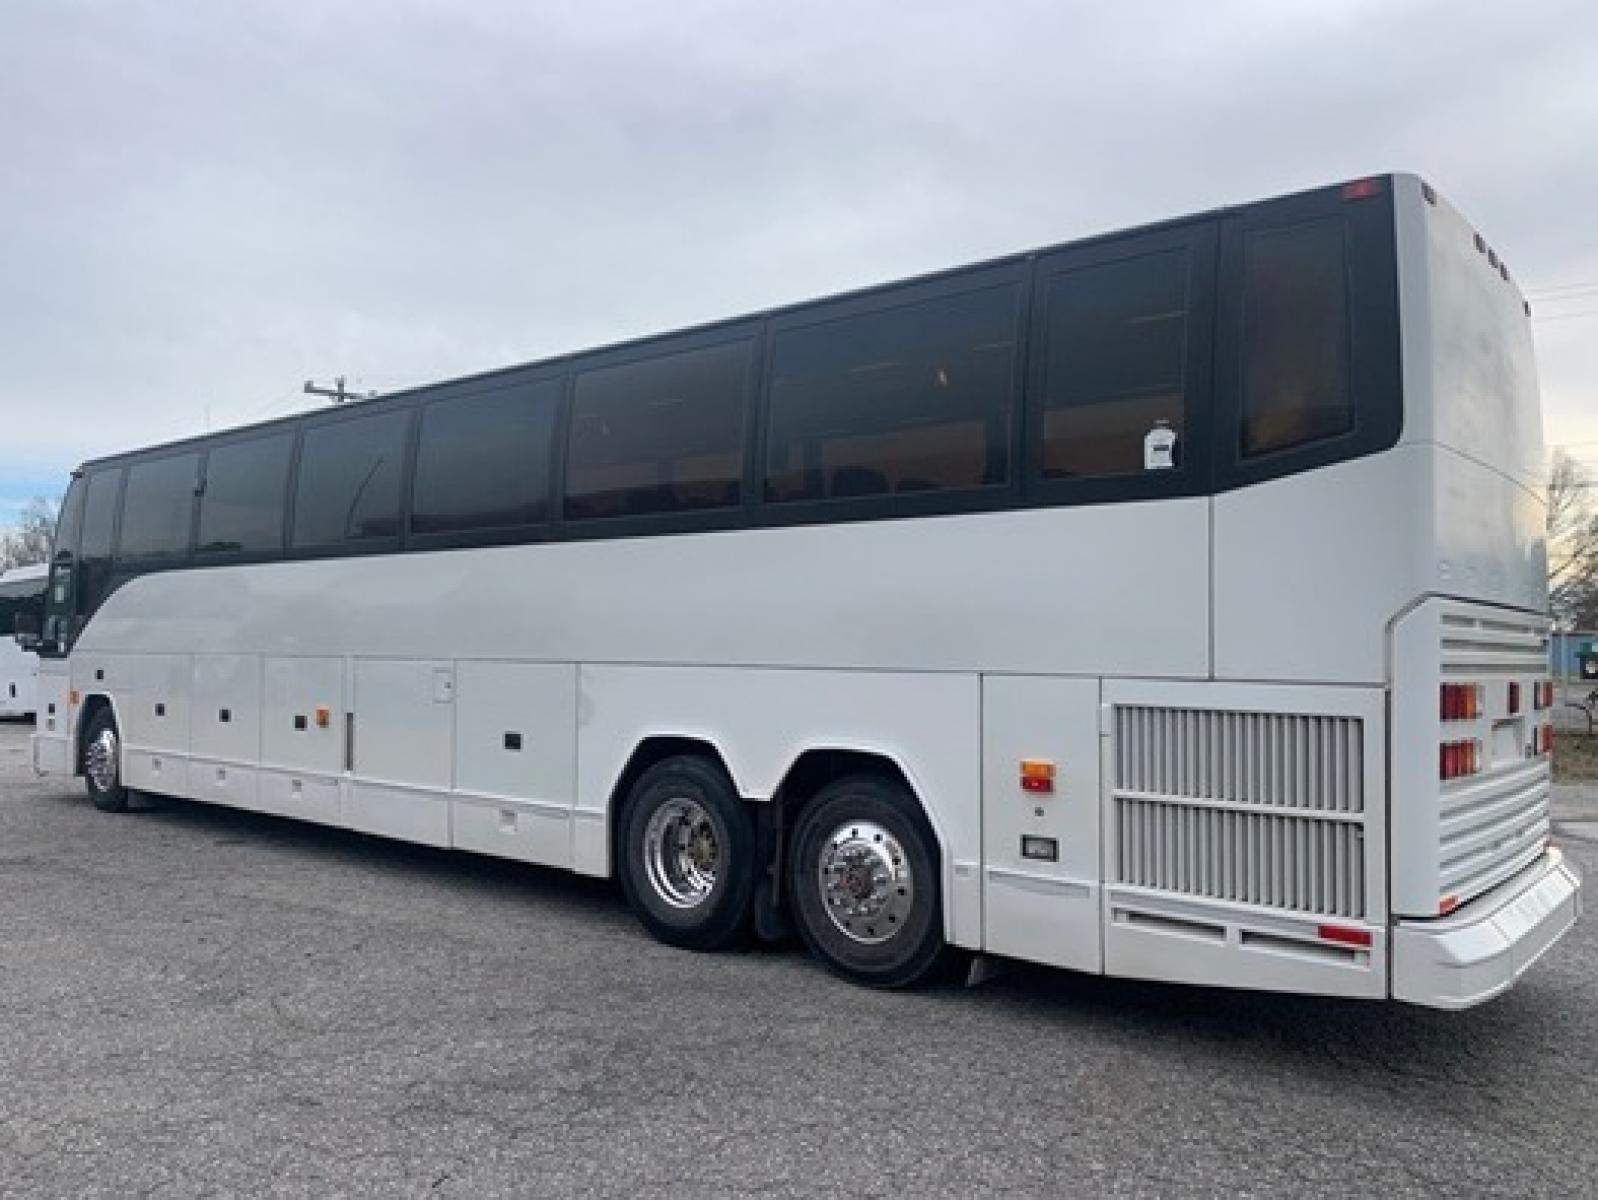 1995 White Prevost HS-45 with an Diesel engine, Allison transmission, 0.000000, 0.000000 - 1995 PREVOST HS-45 - Series 60 Detroit Diesel - Allison Automatic Transmission - 45' - Alloy Wheels - 56 Passengers - Enclosed Parcel Racks - 3 Flat Screens and DVD - Restroom - One Owner - Southern Coach Approx 1.1mil recent motor trans change. - Photo #3